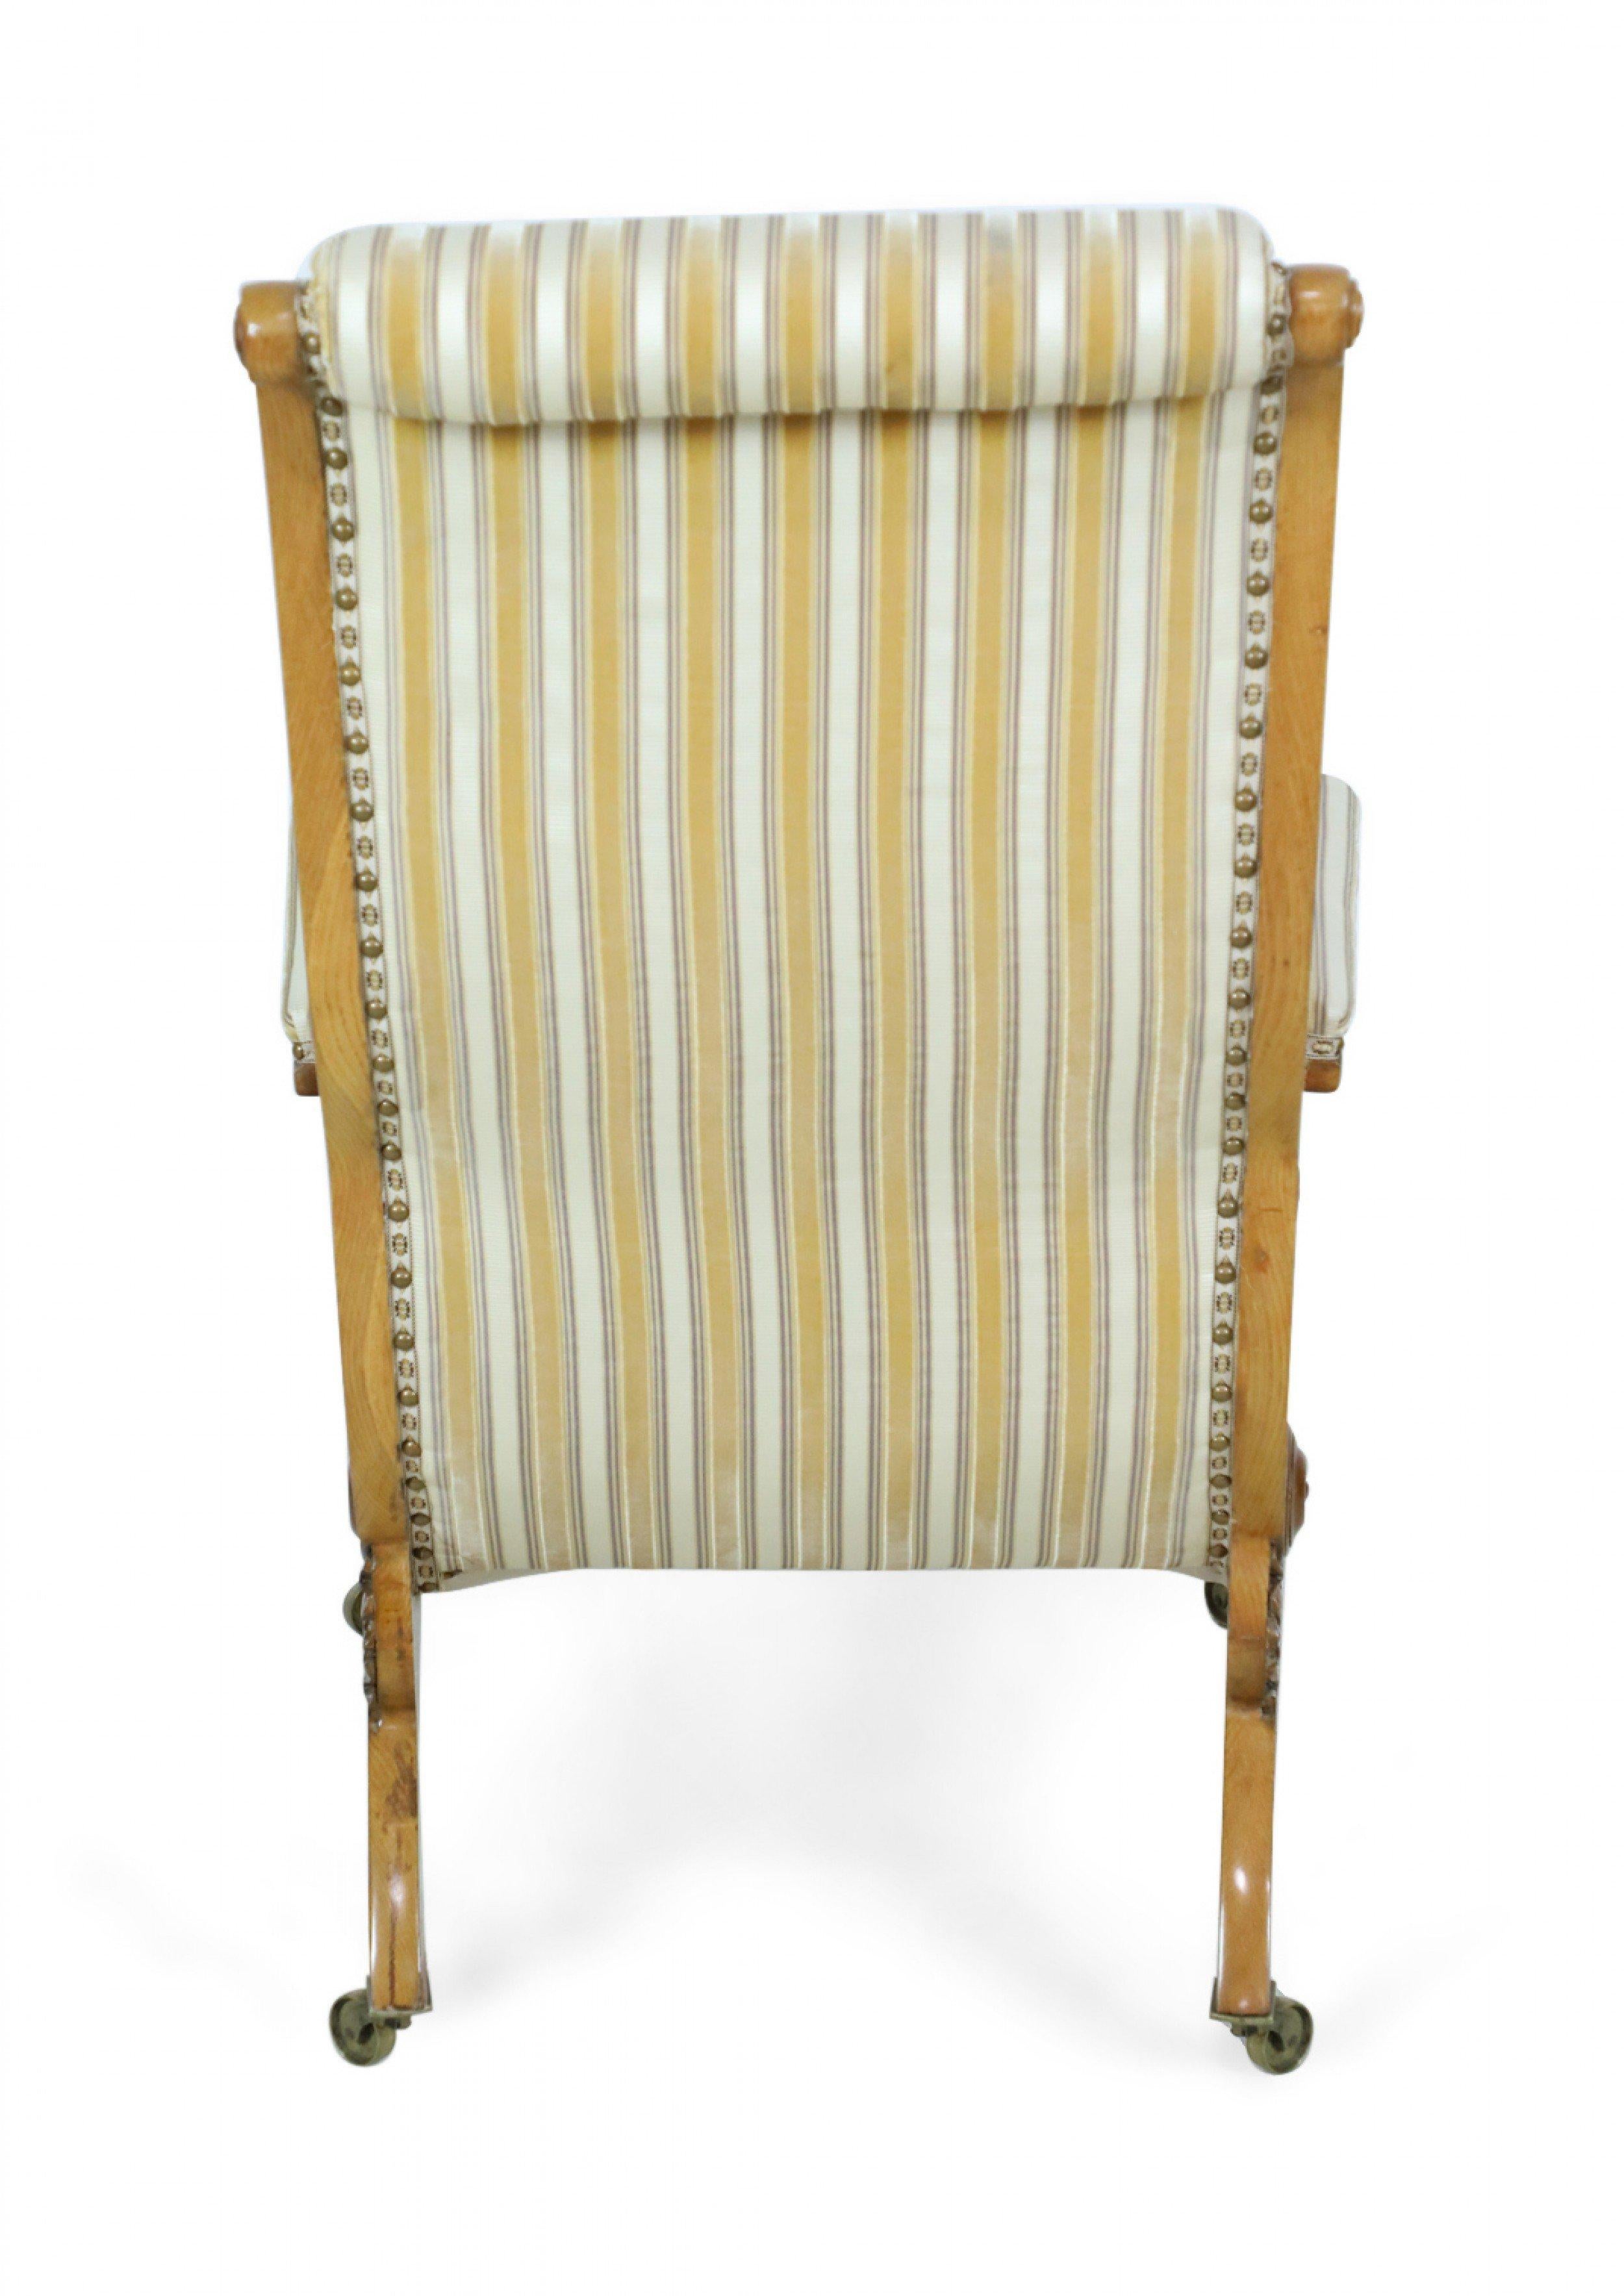 English Victorian Blond Wood Scroll Armchair with Striped Upholstery For Sale 6